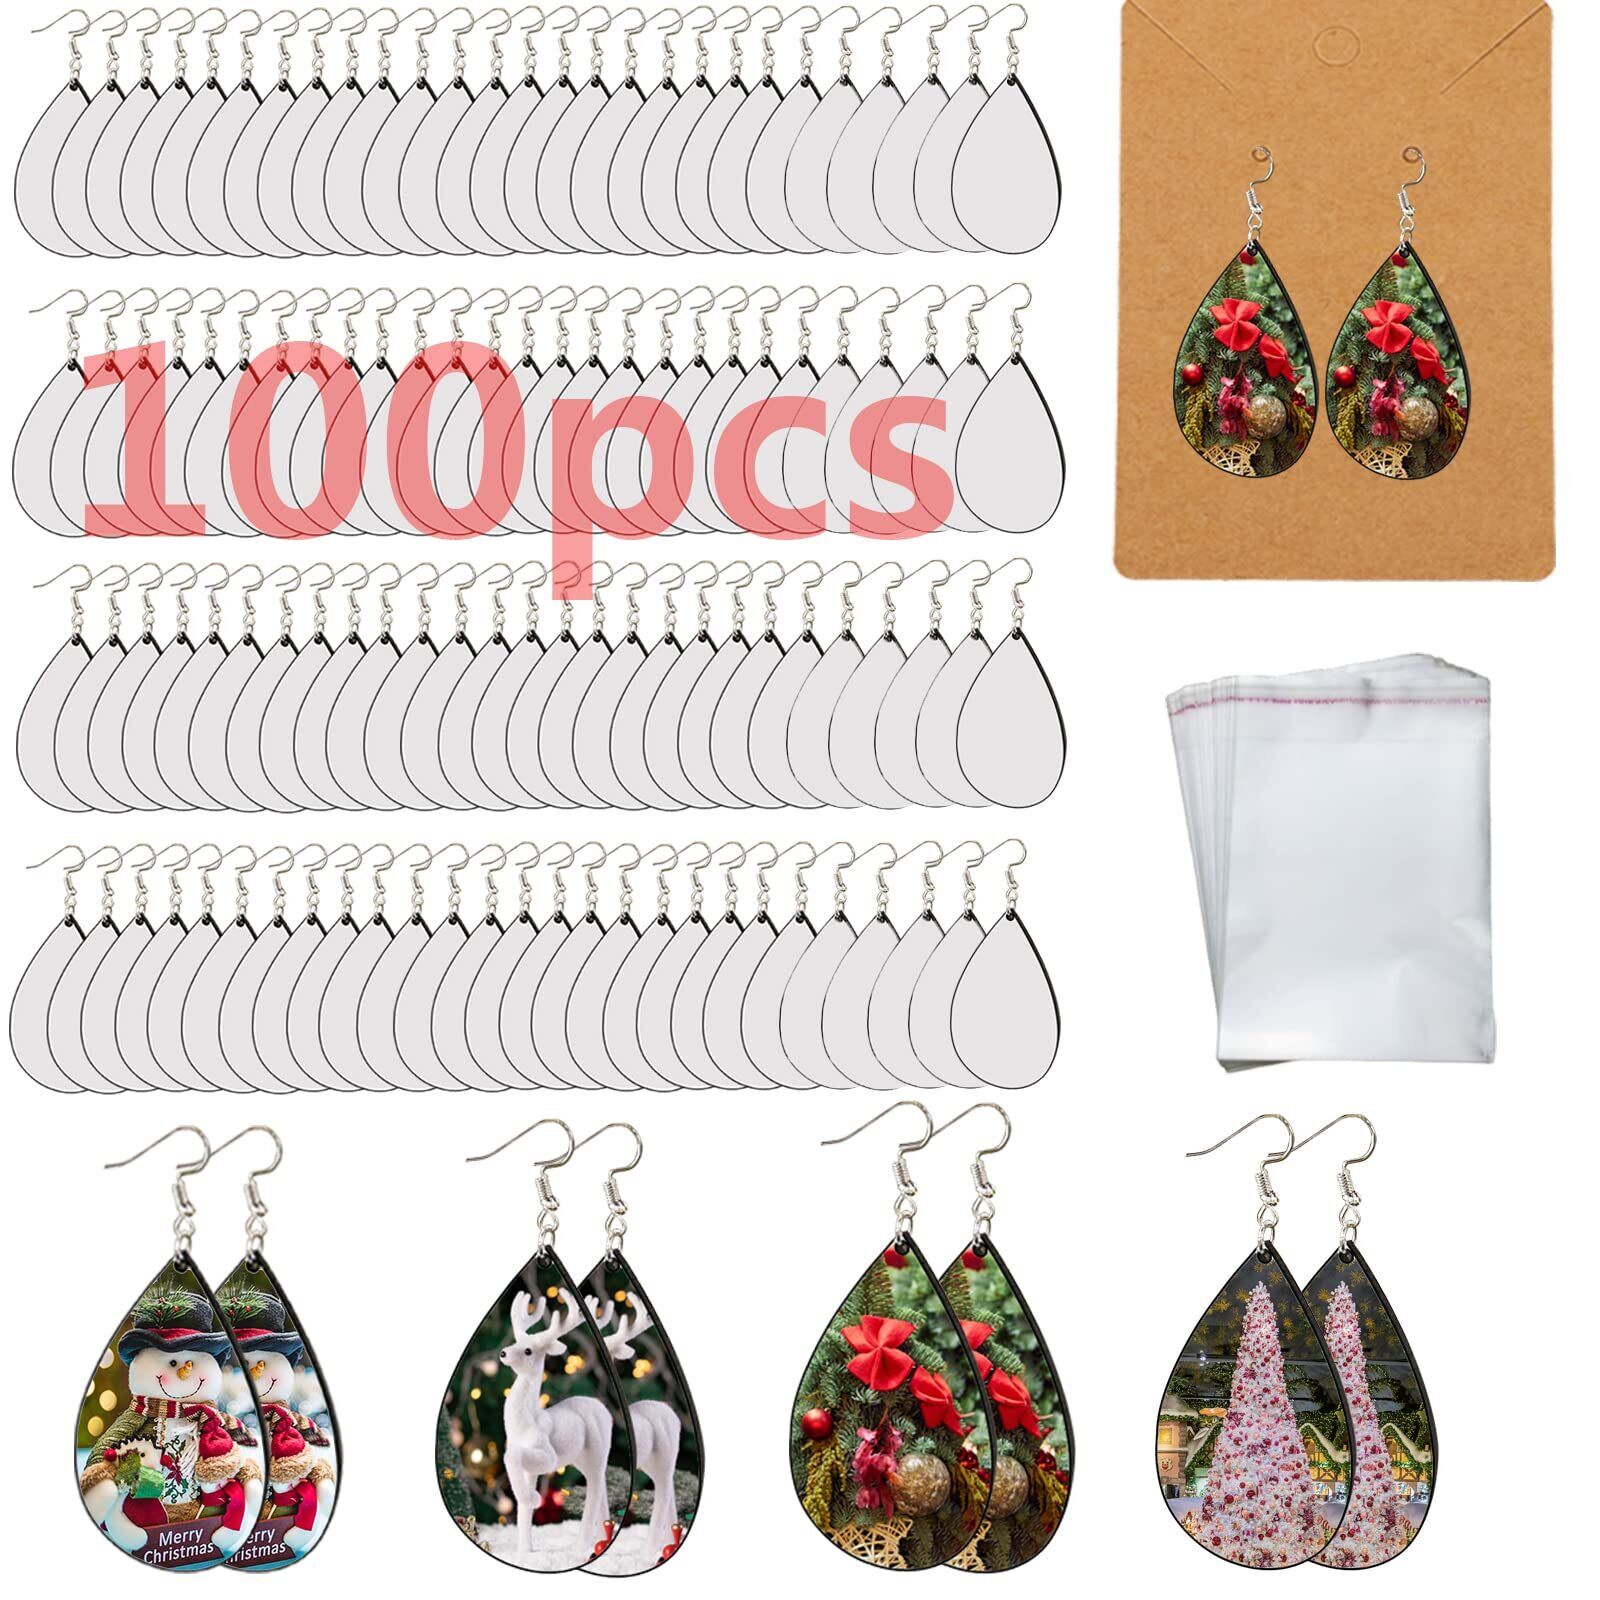 100 pcs Double-Sided Sublimation Earring Blanks Bulk with Hooks & Rings